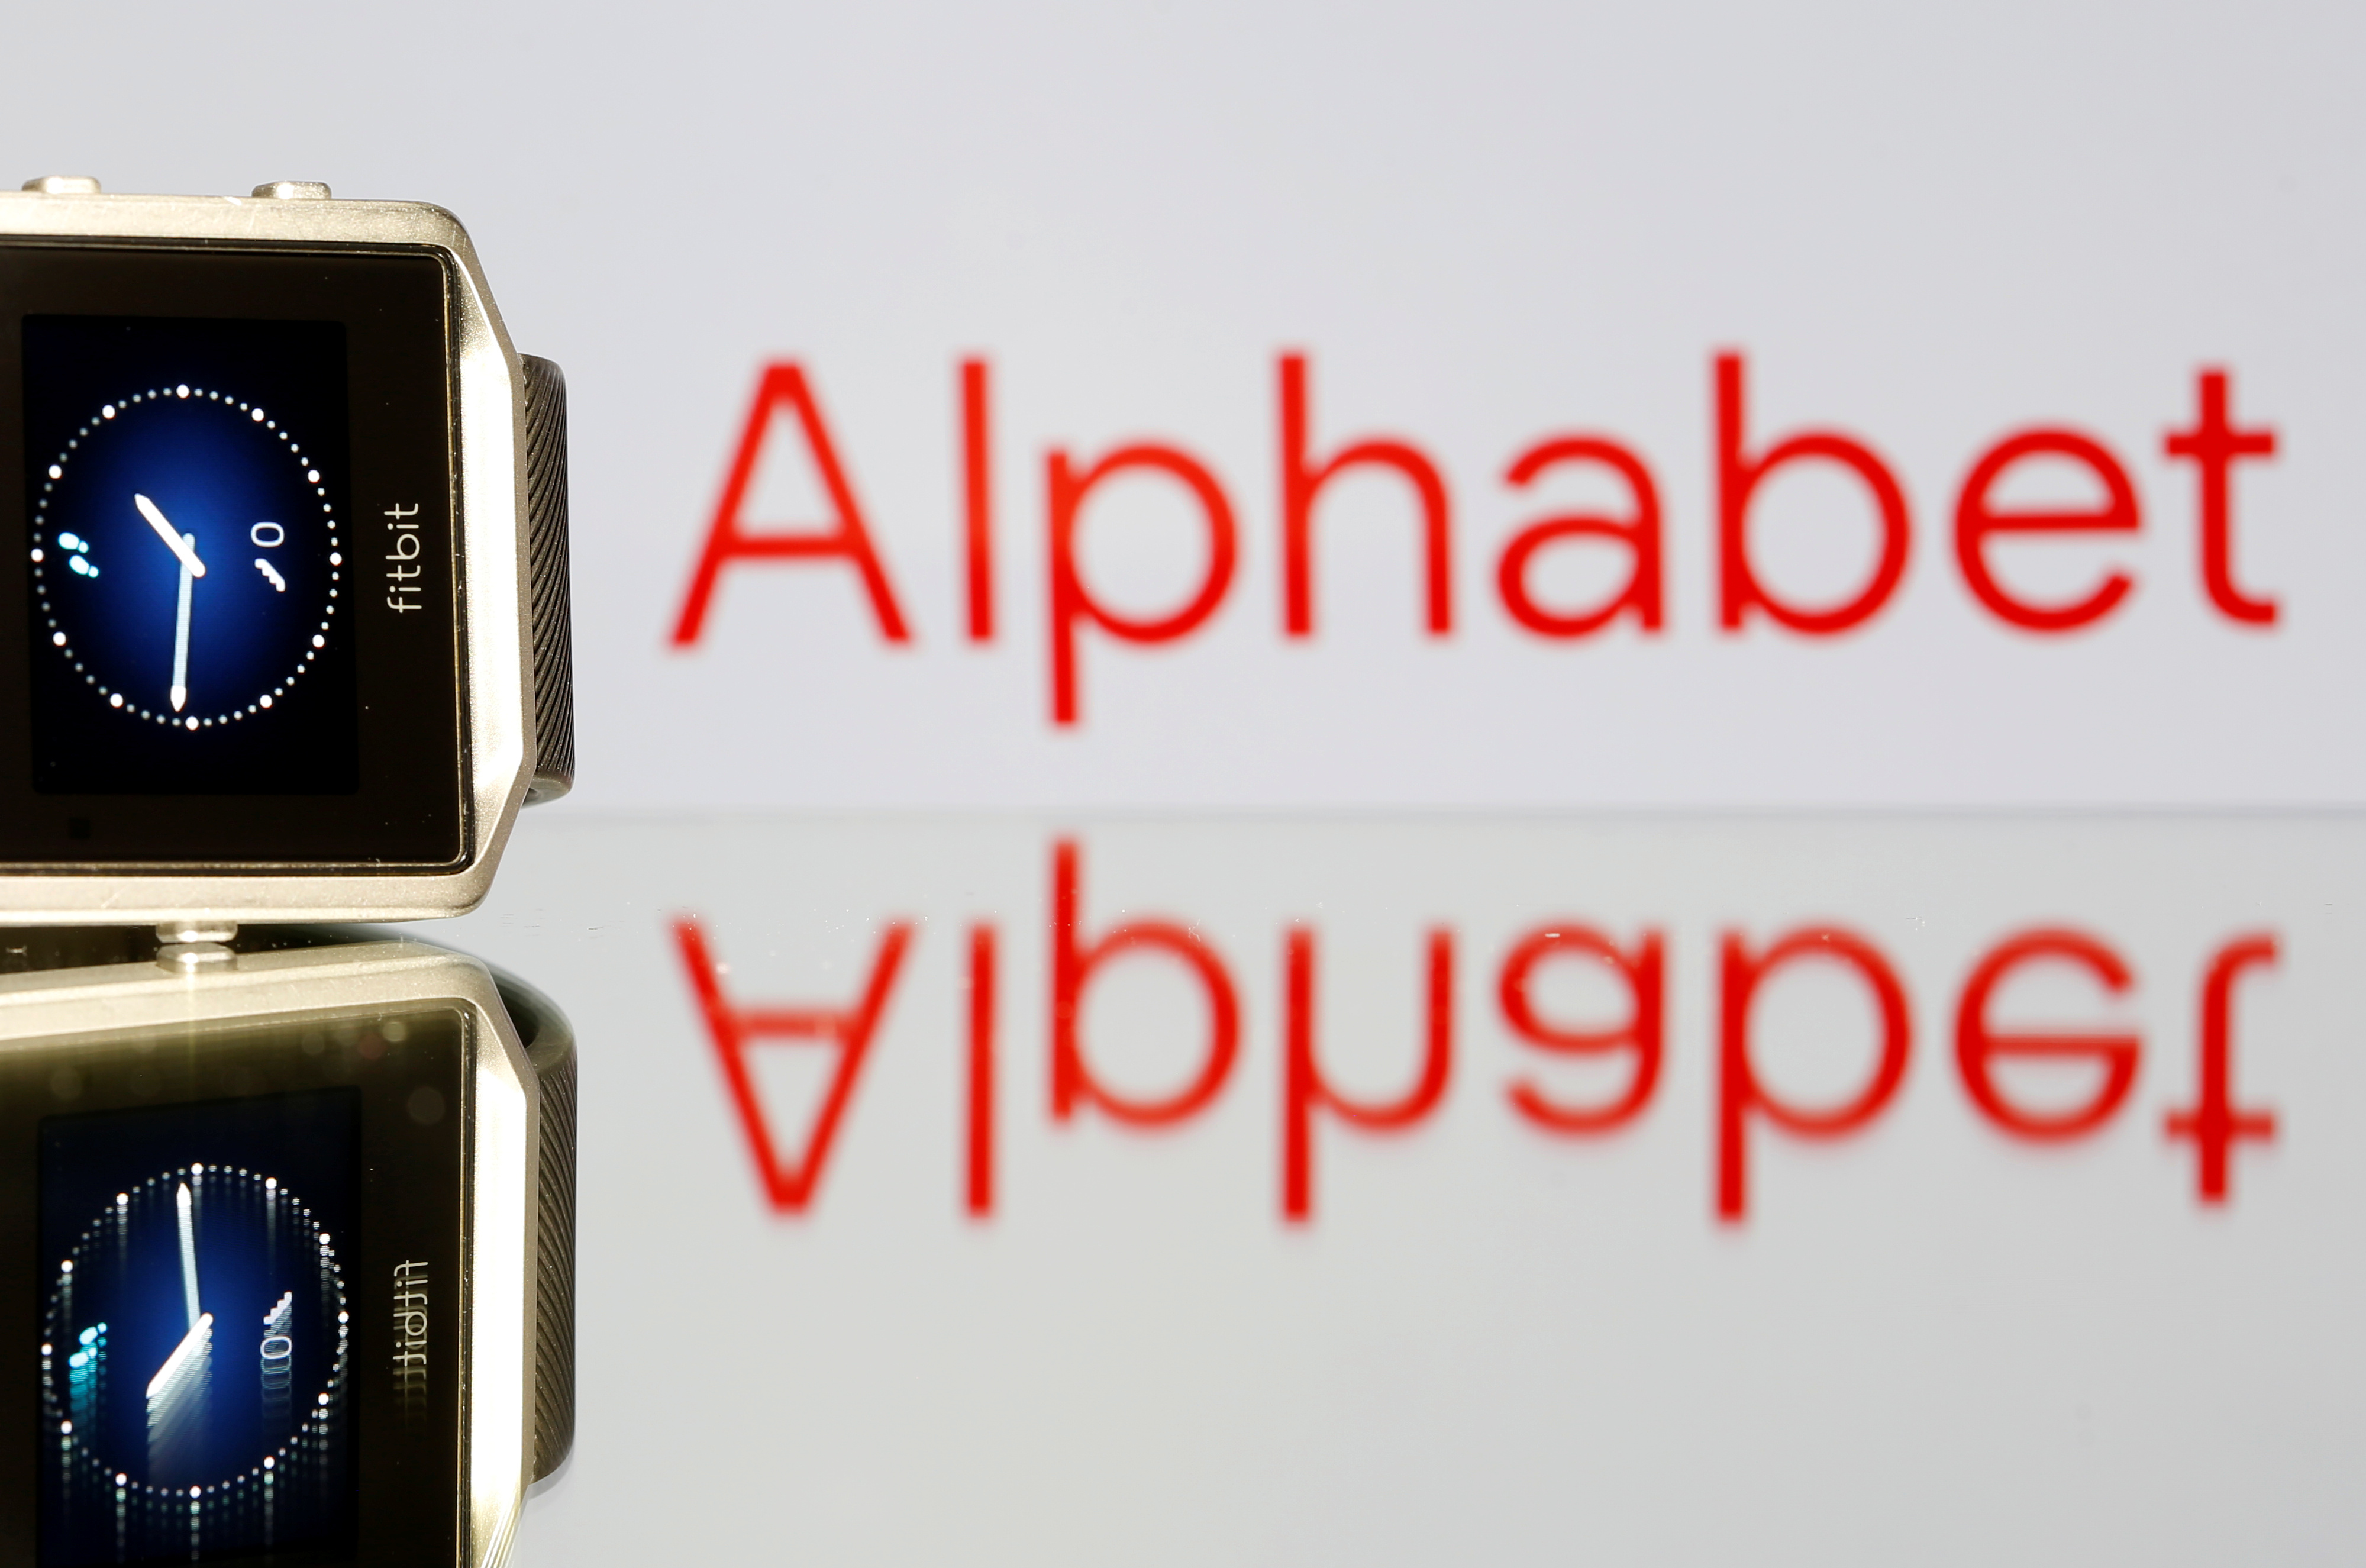 Fitbit Blaze watch is seen in front of a displayed Alphabet logo in this illustration